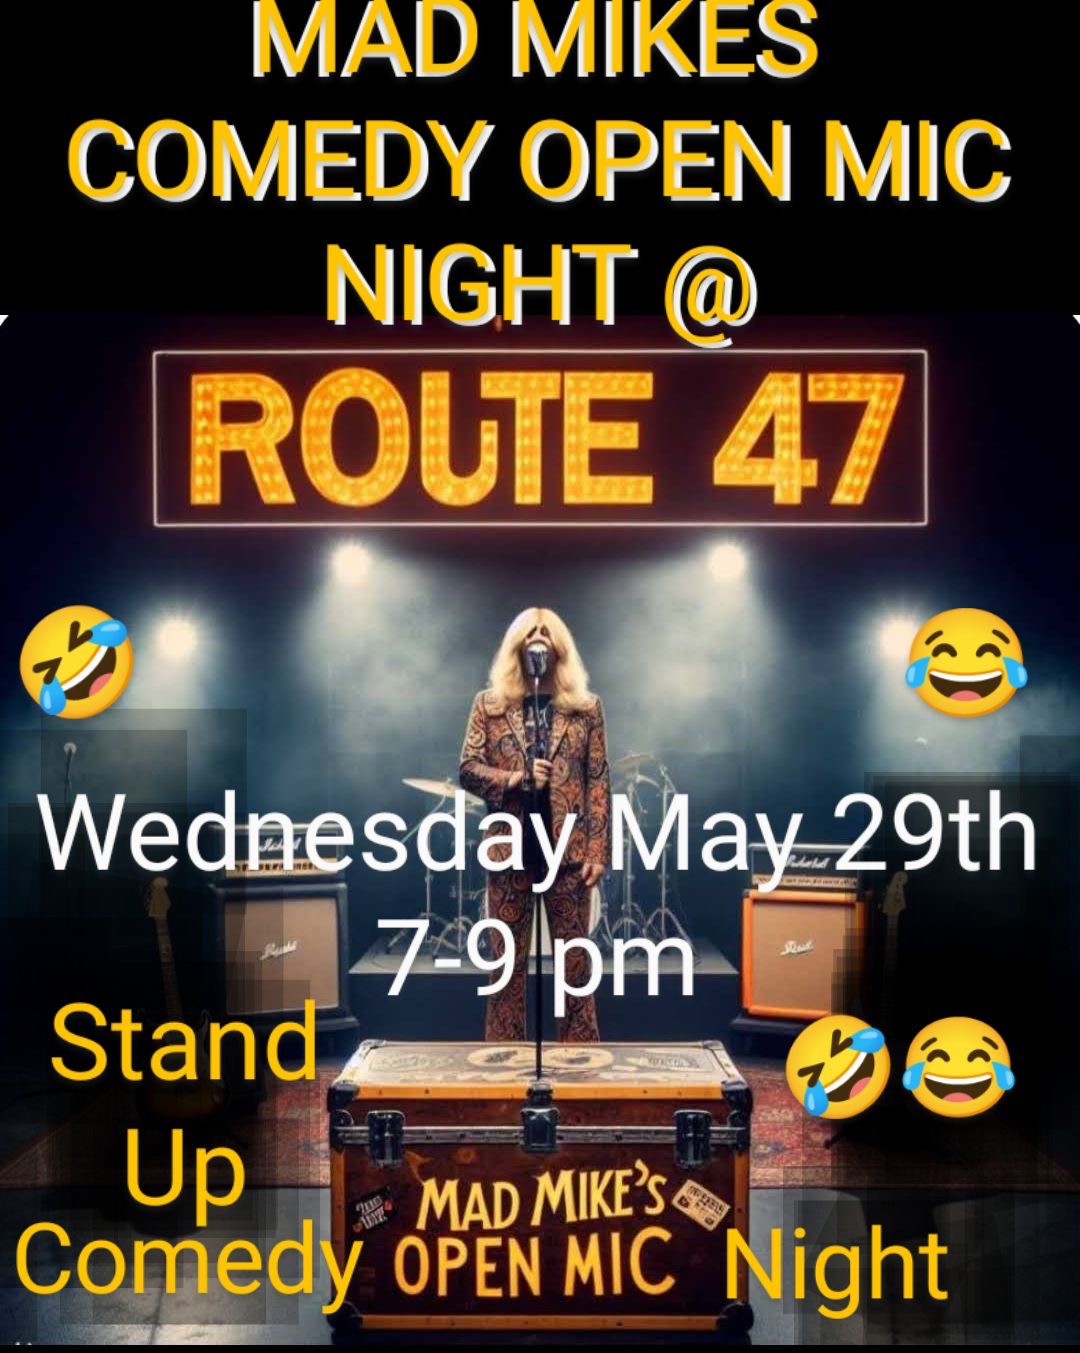 Mad Mikes Comedy Open Mic